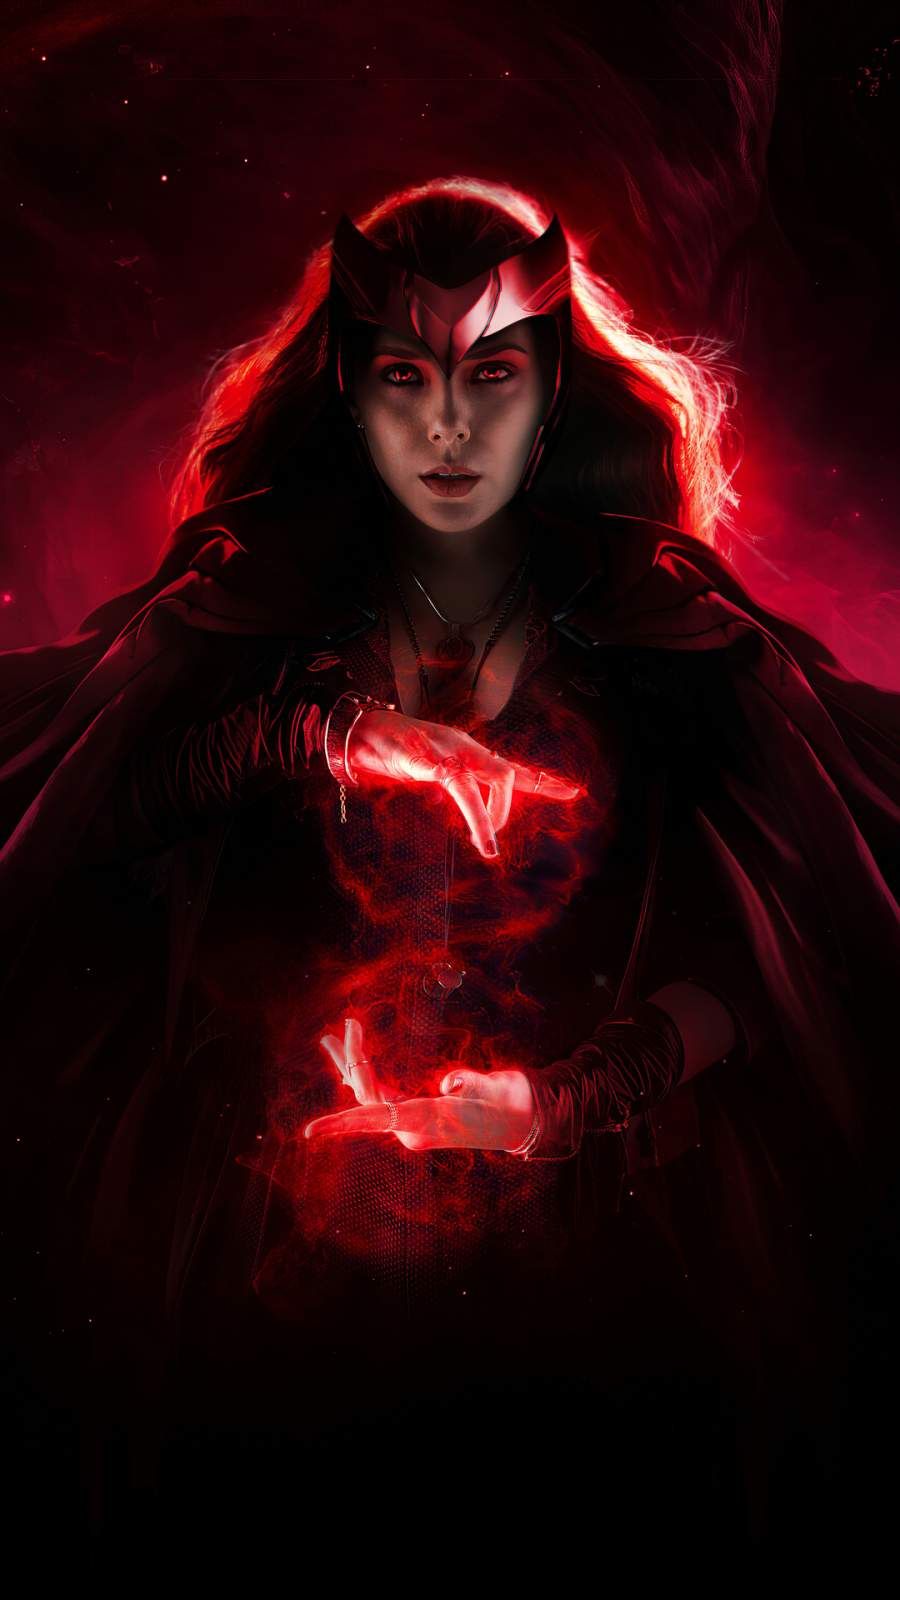 Scarlet Witch iPhone Wallpaper. Scarlet witch avengers, Scarlet witch marvel, Scarlet witch comic